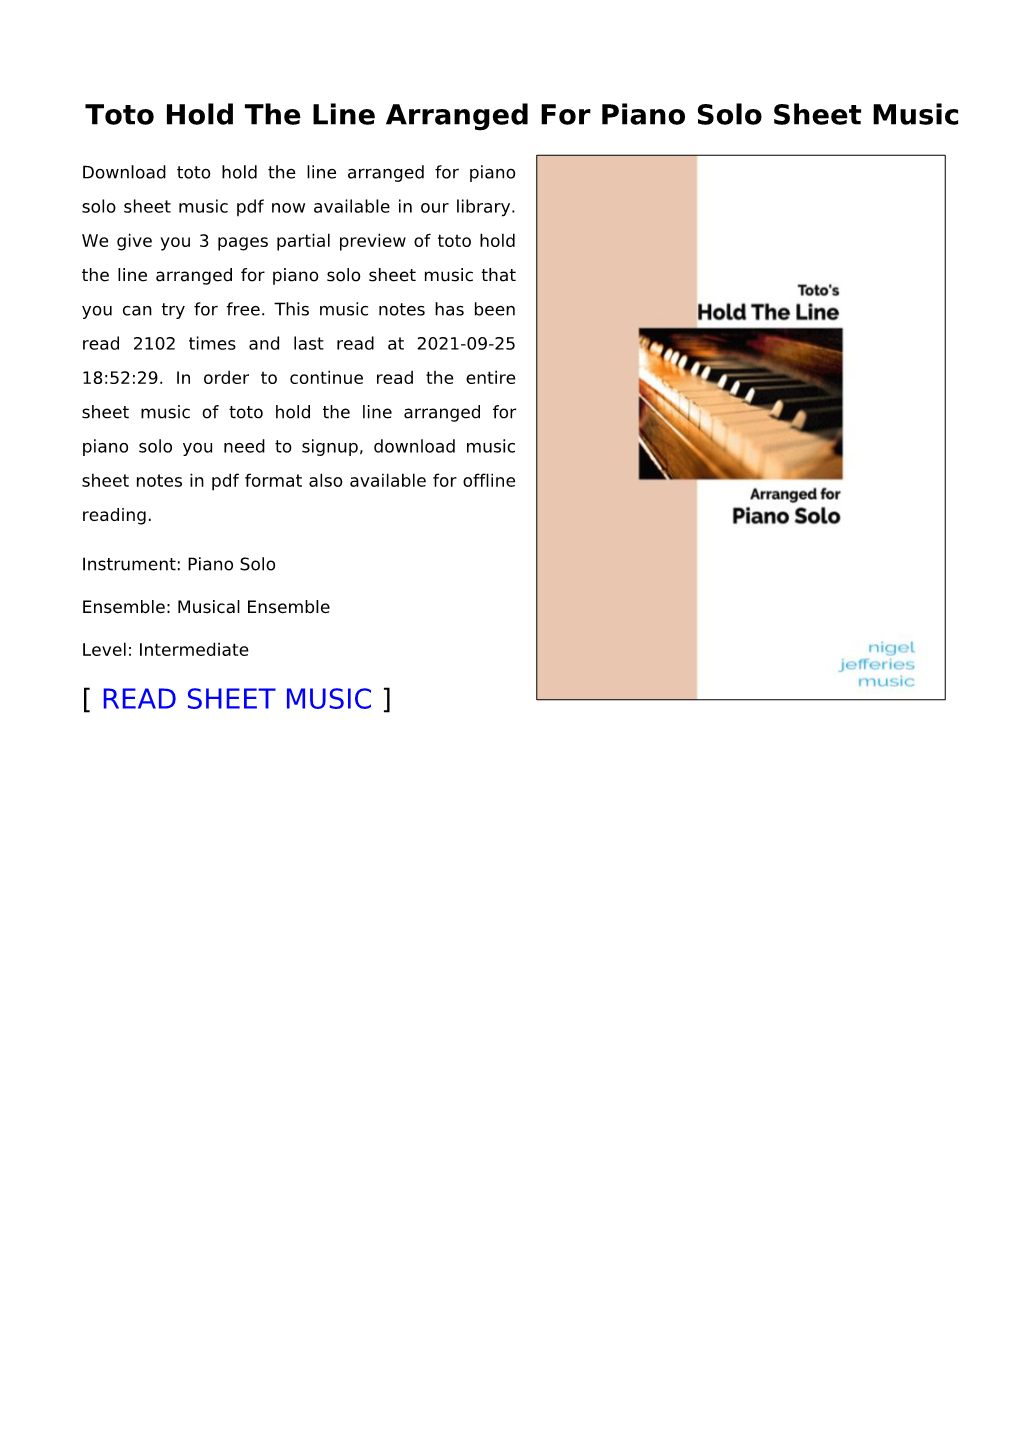 Toto Hold the Line Arranged for Piano Solo Sheet Music